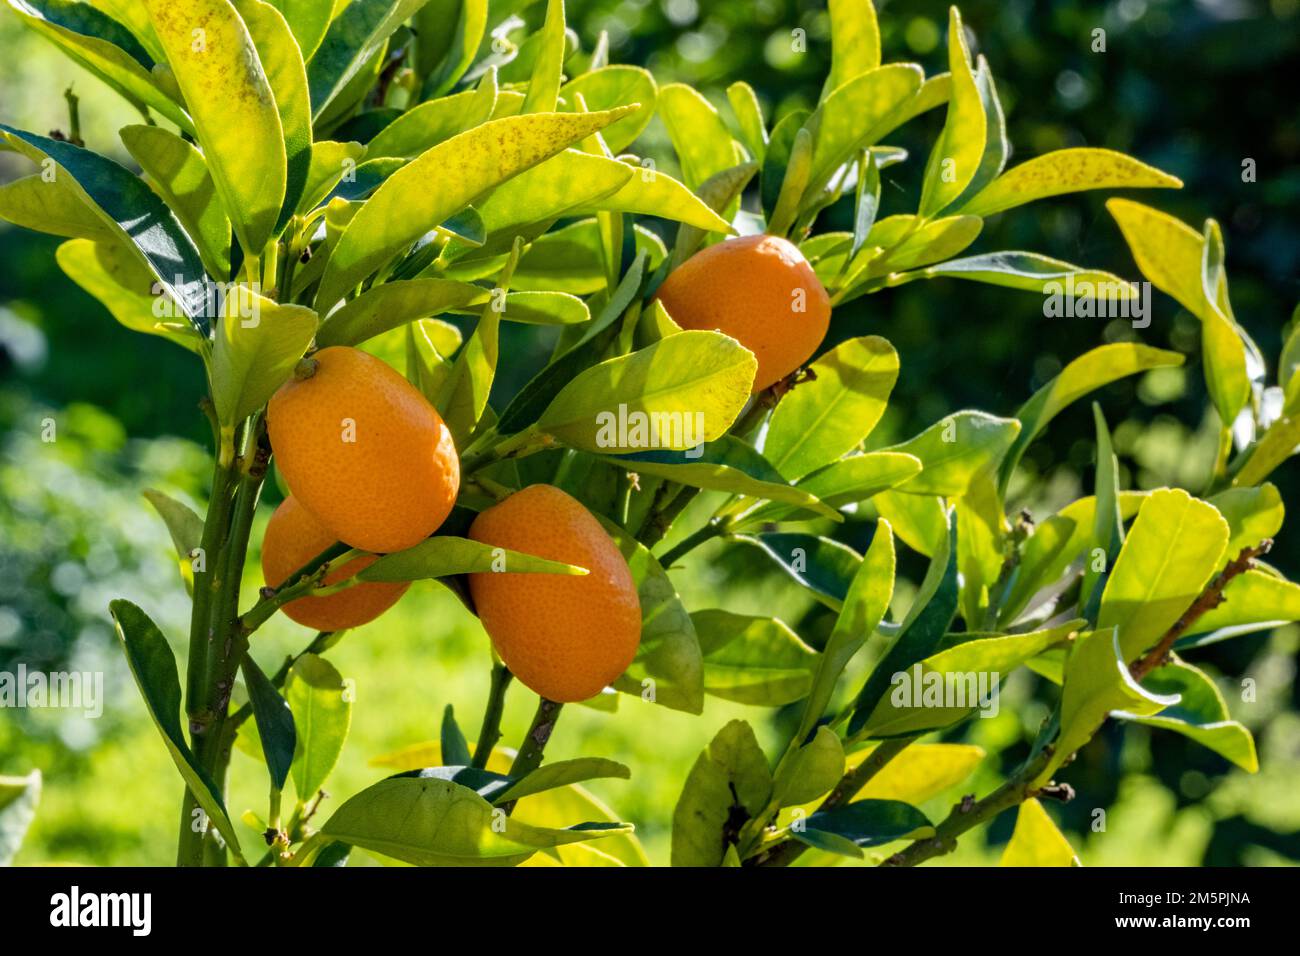 Bunch of fresh ripe kumquats in a citrus farm. Close-up photo. Sun reflecting bright on organic fruit surface. Natural food background with copy space Stock Photo